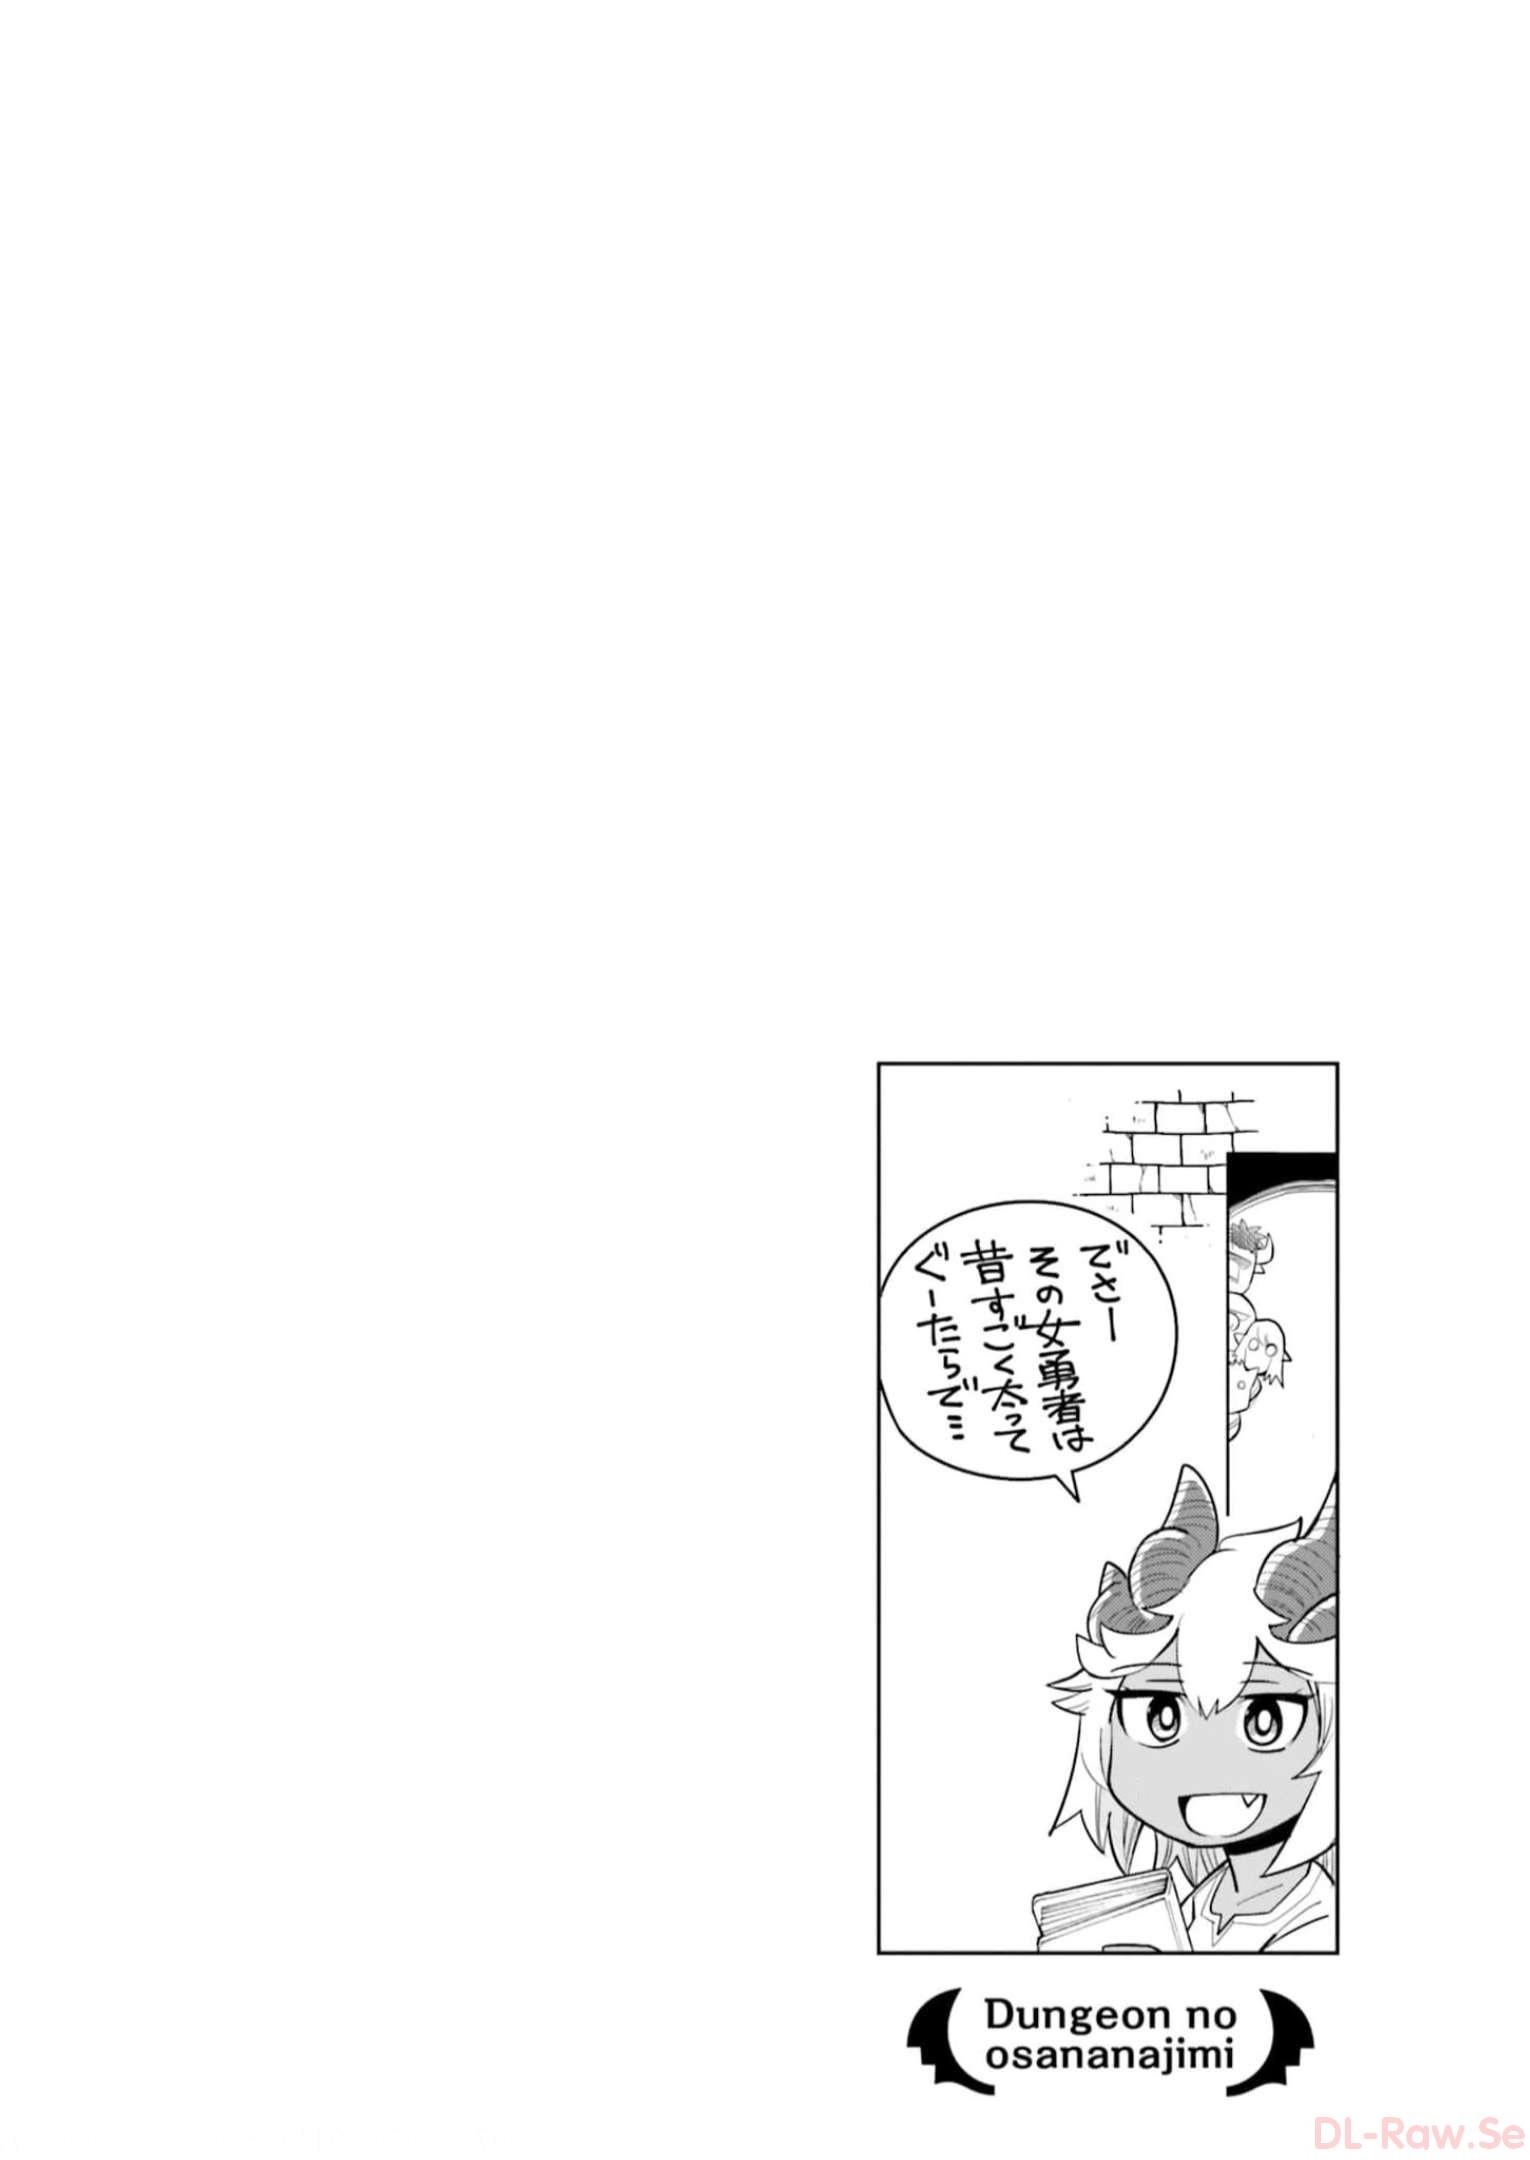 Dungeon Friends Forever Dungeon's Childhood Friend ダンジョンの幼なじみ 第18.1話 - Page 6